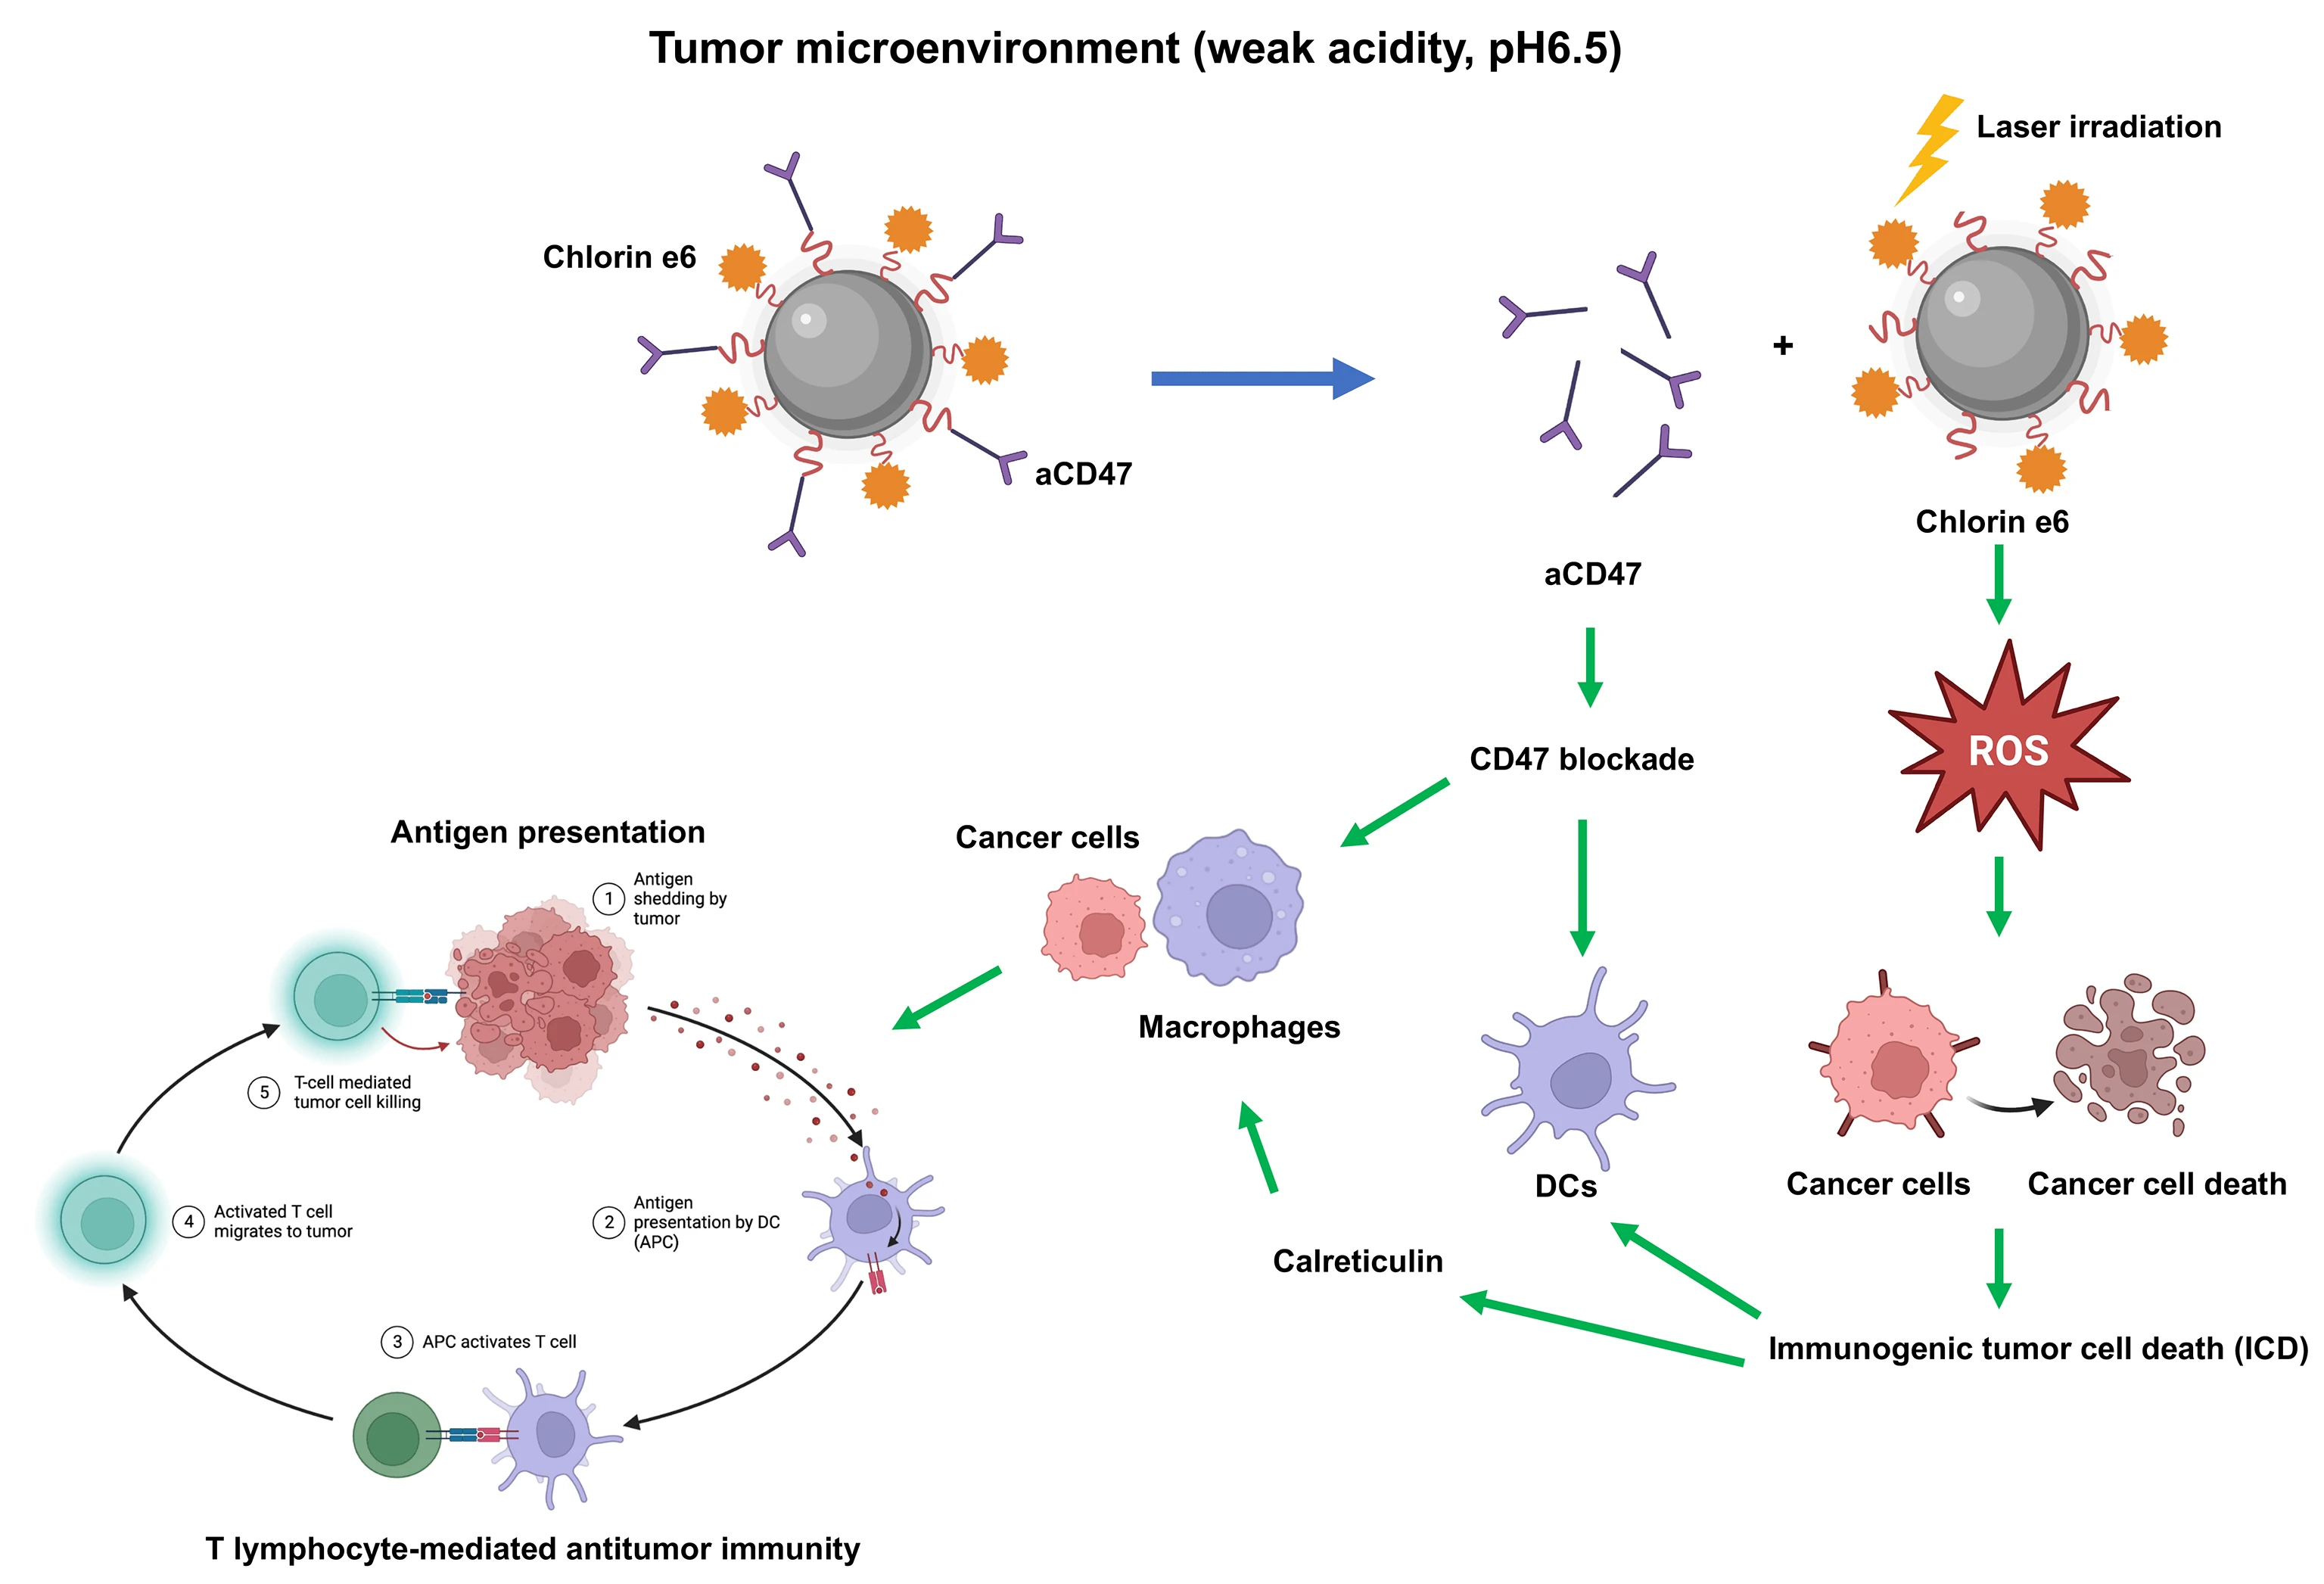 Codelivery of anti-CD47 antibody and chlorin e6 using a dual pH-sensitive nanodrug for photodynamic immunotherapy of osteosarcoma